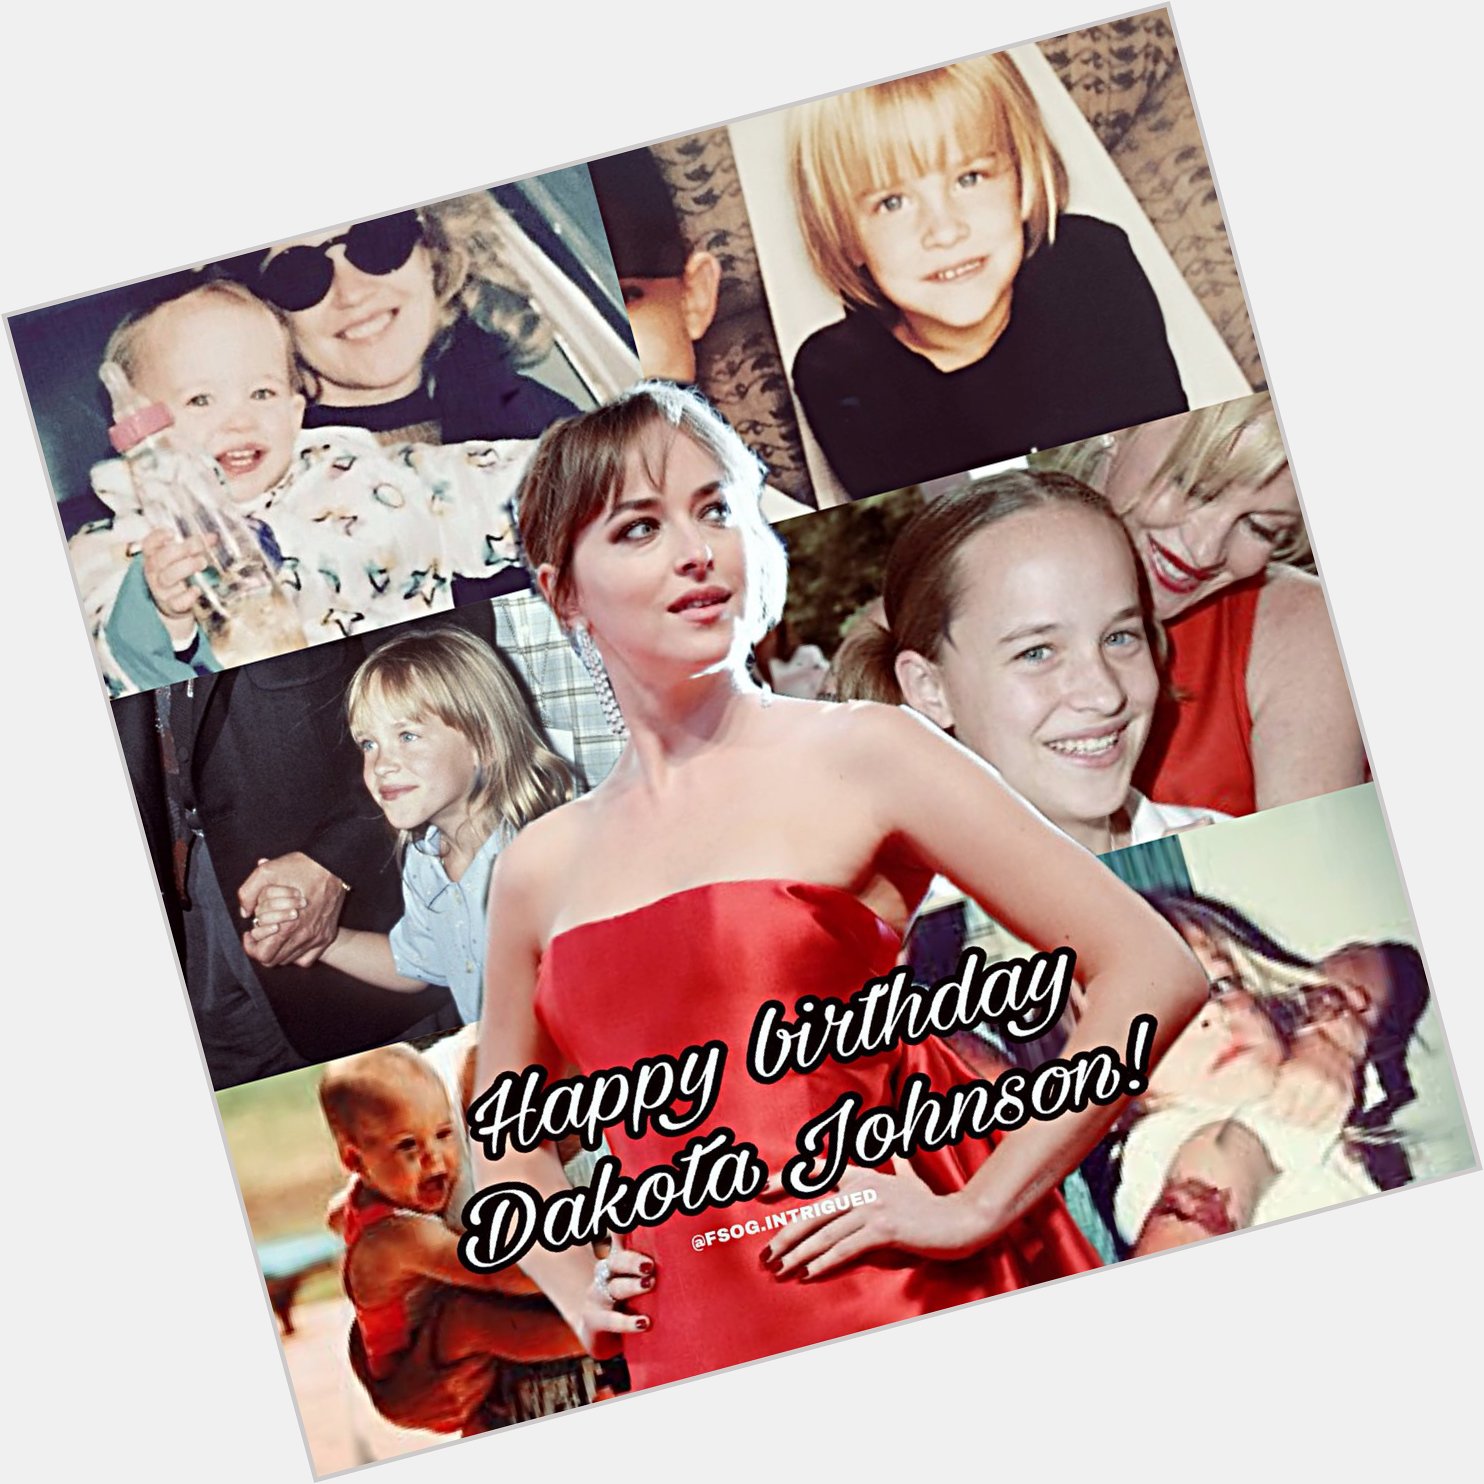 Happy birthday Dakota Johnson. Thank you for everything, you deserve nothing but happiness and love. I love you   